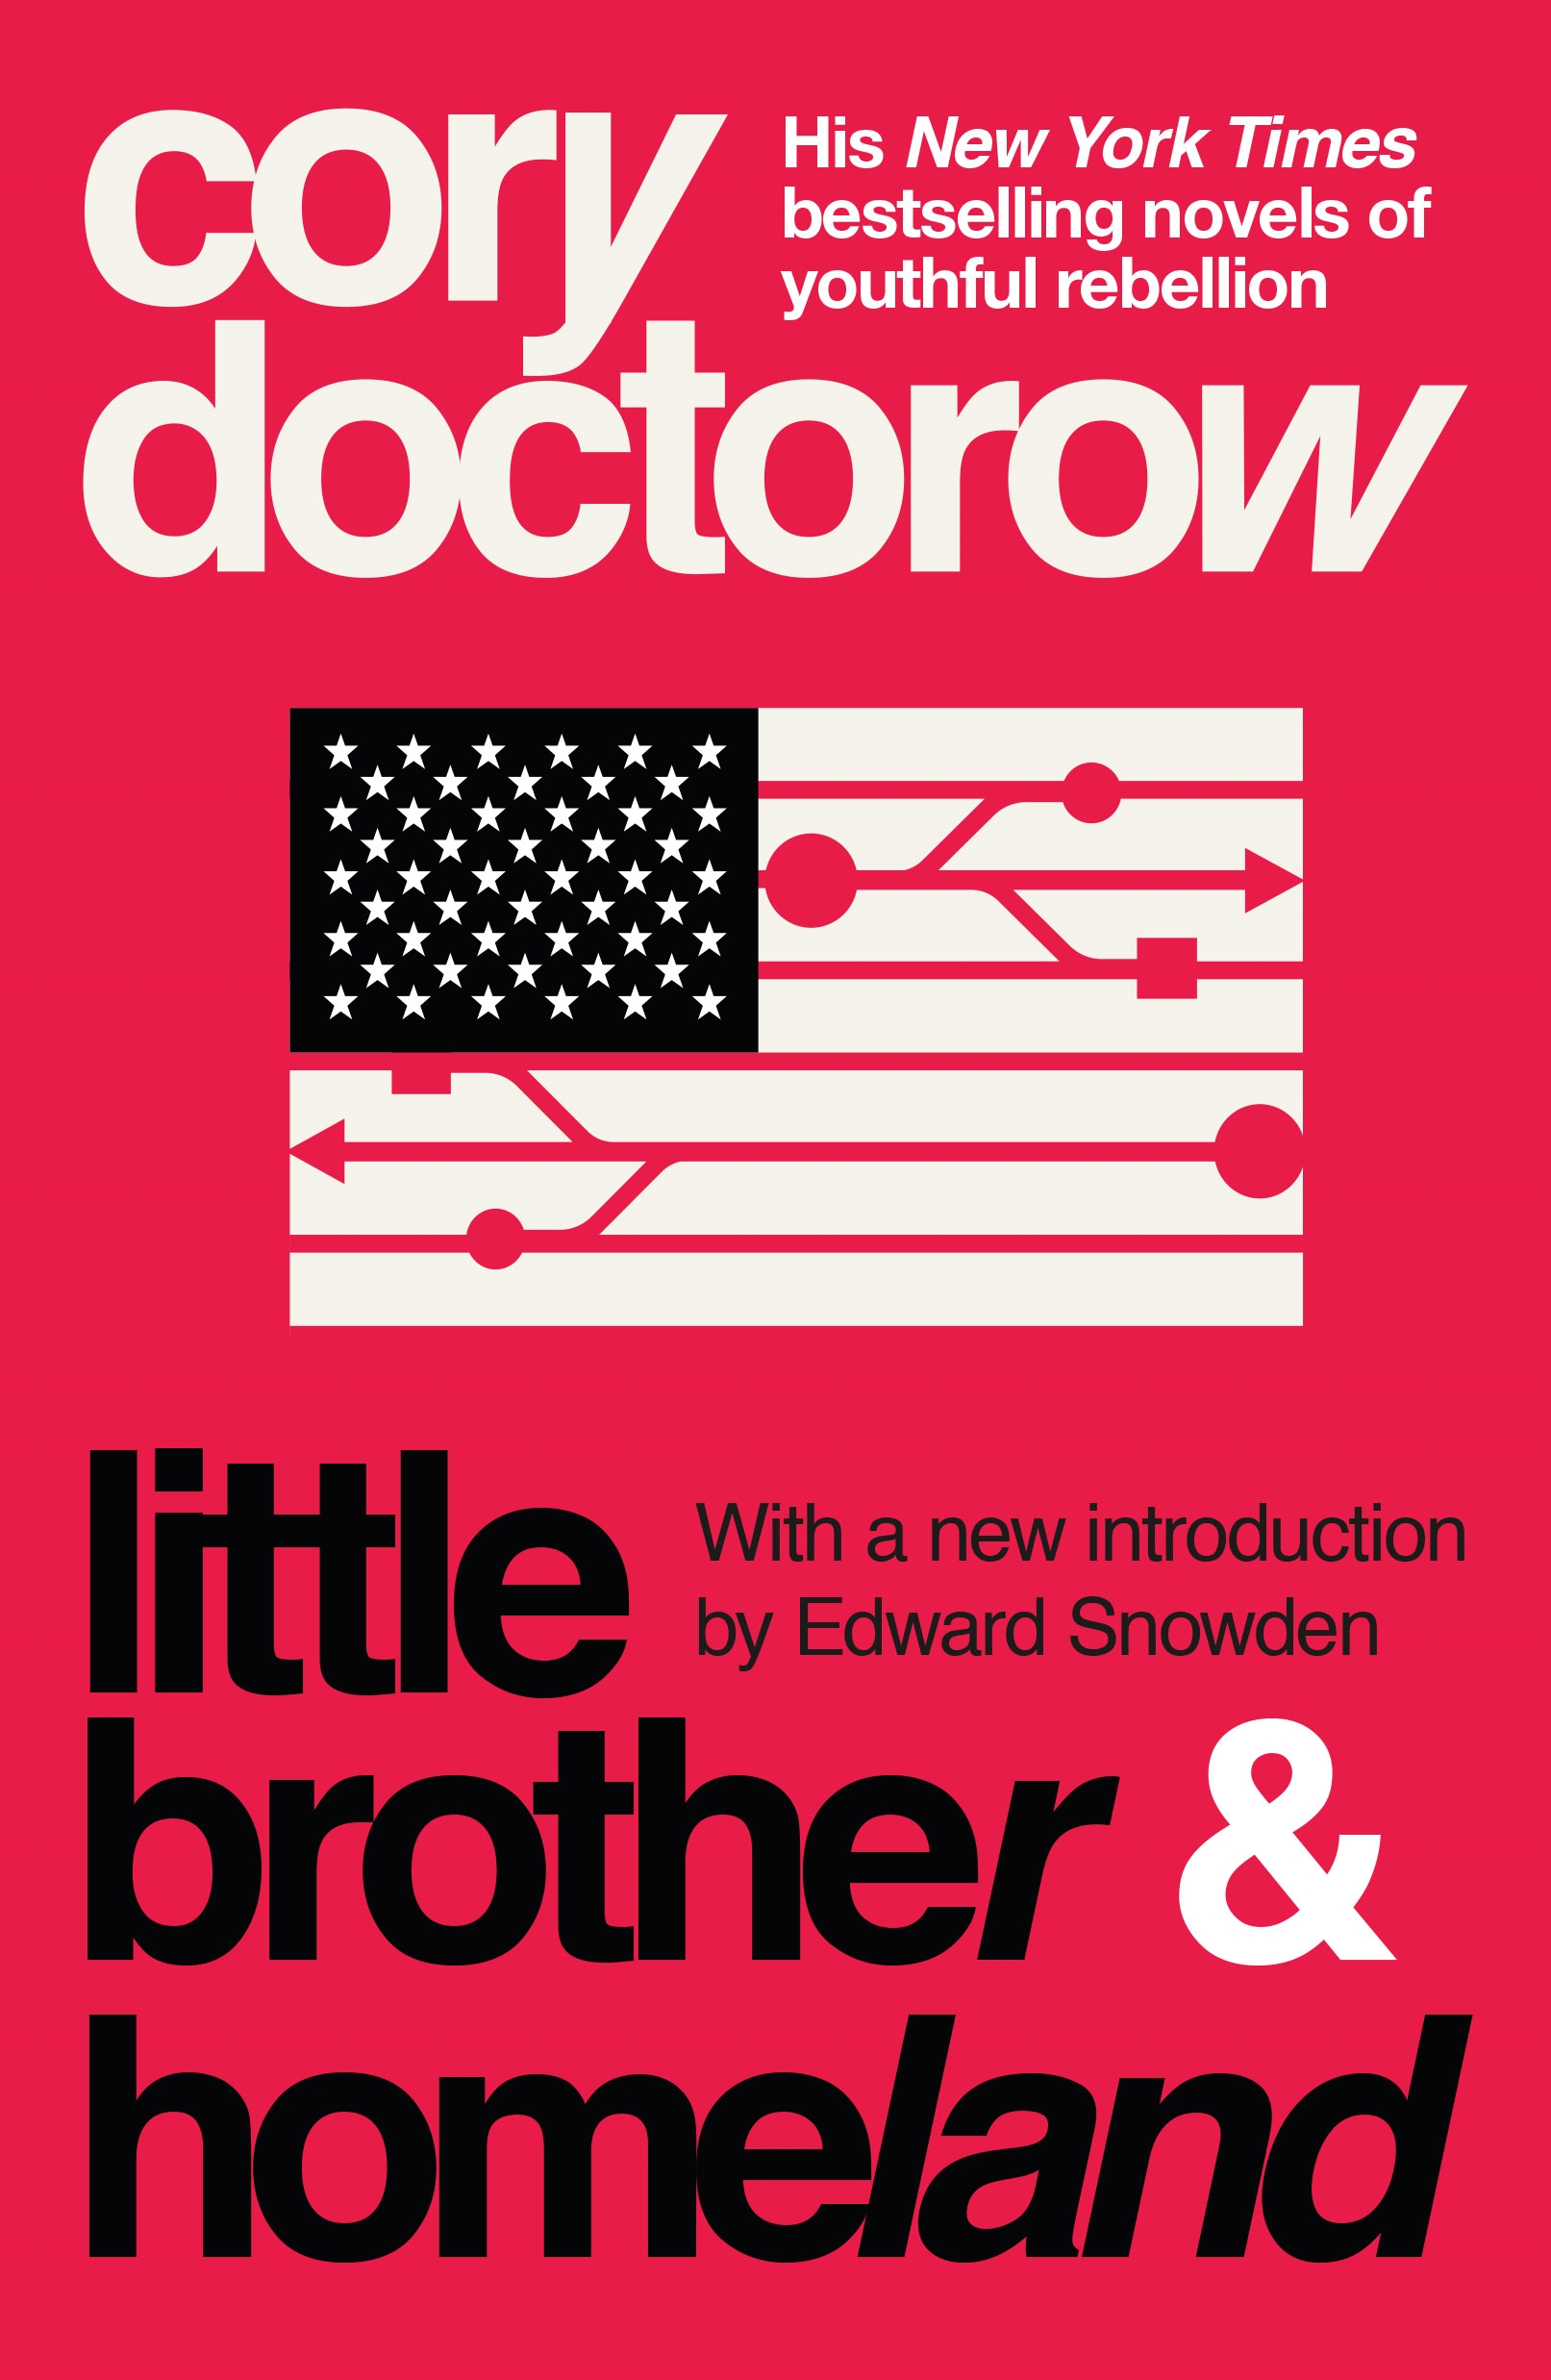 Little Brother & Homeland by Cory Doctorow